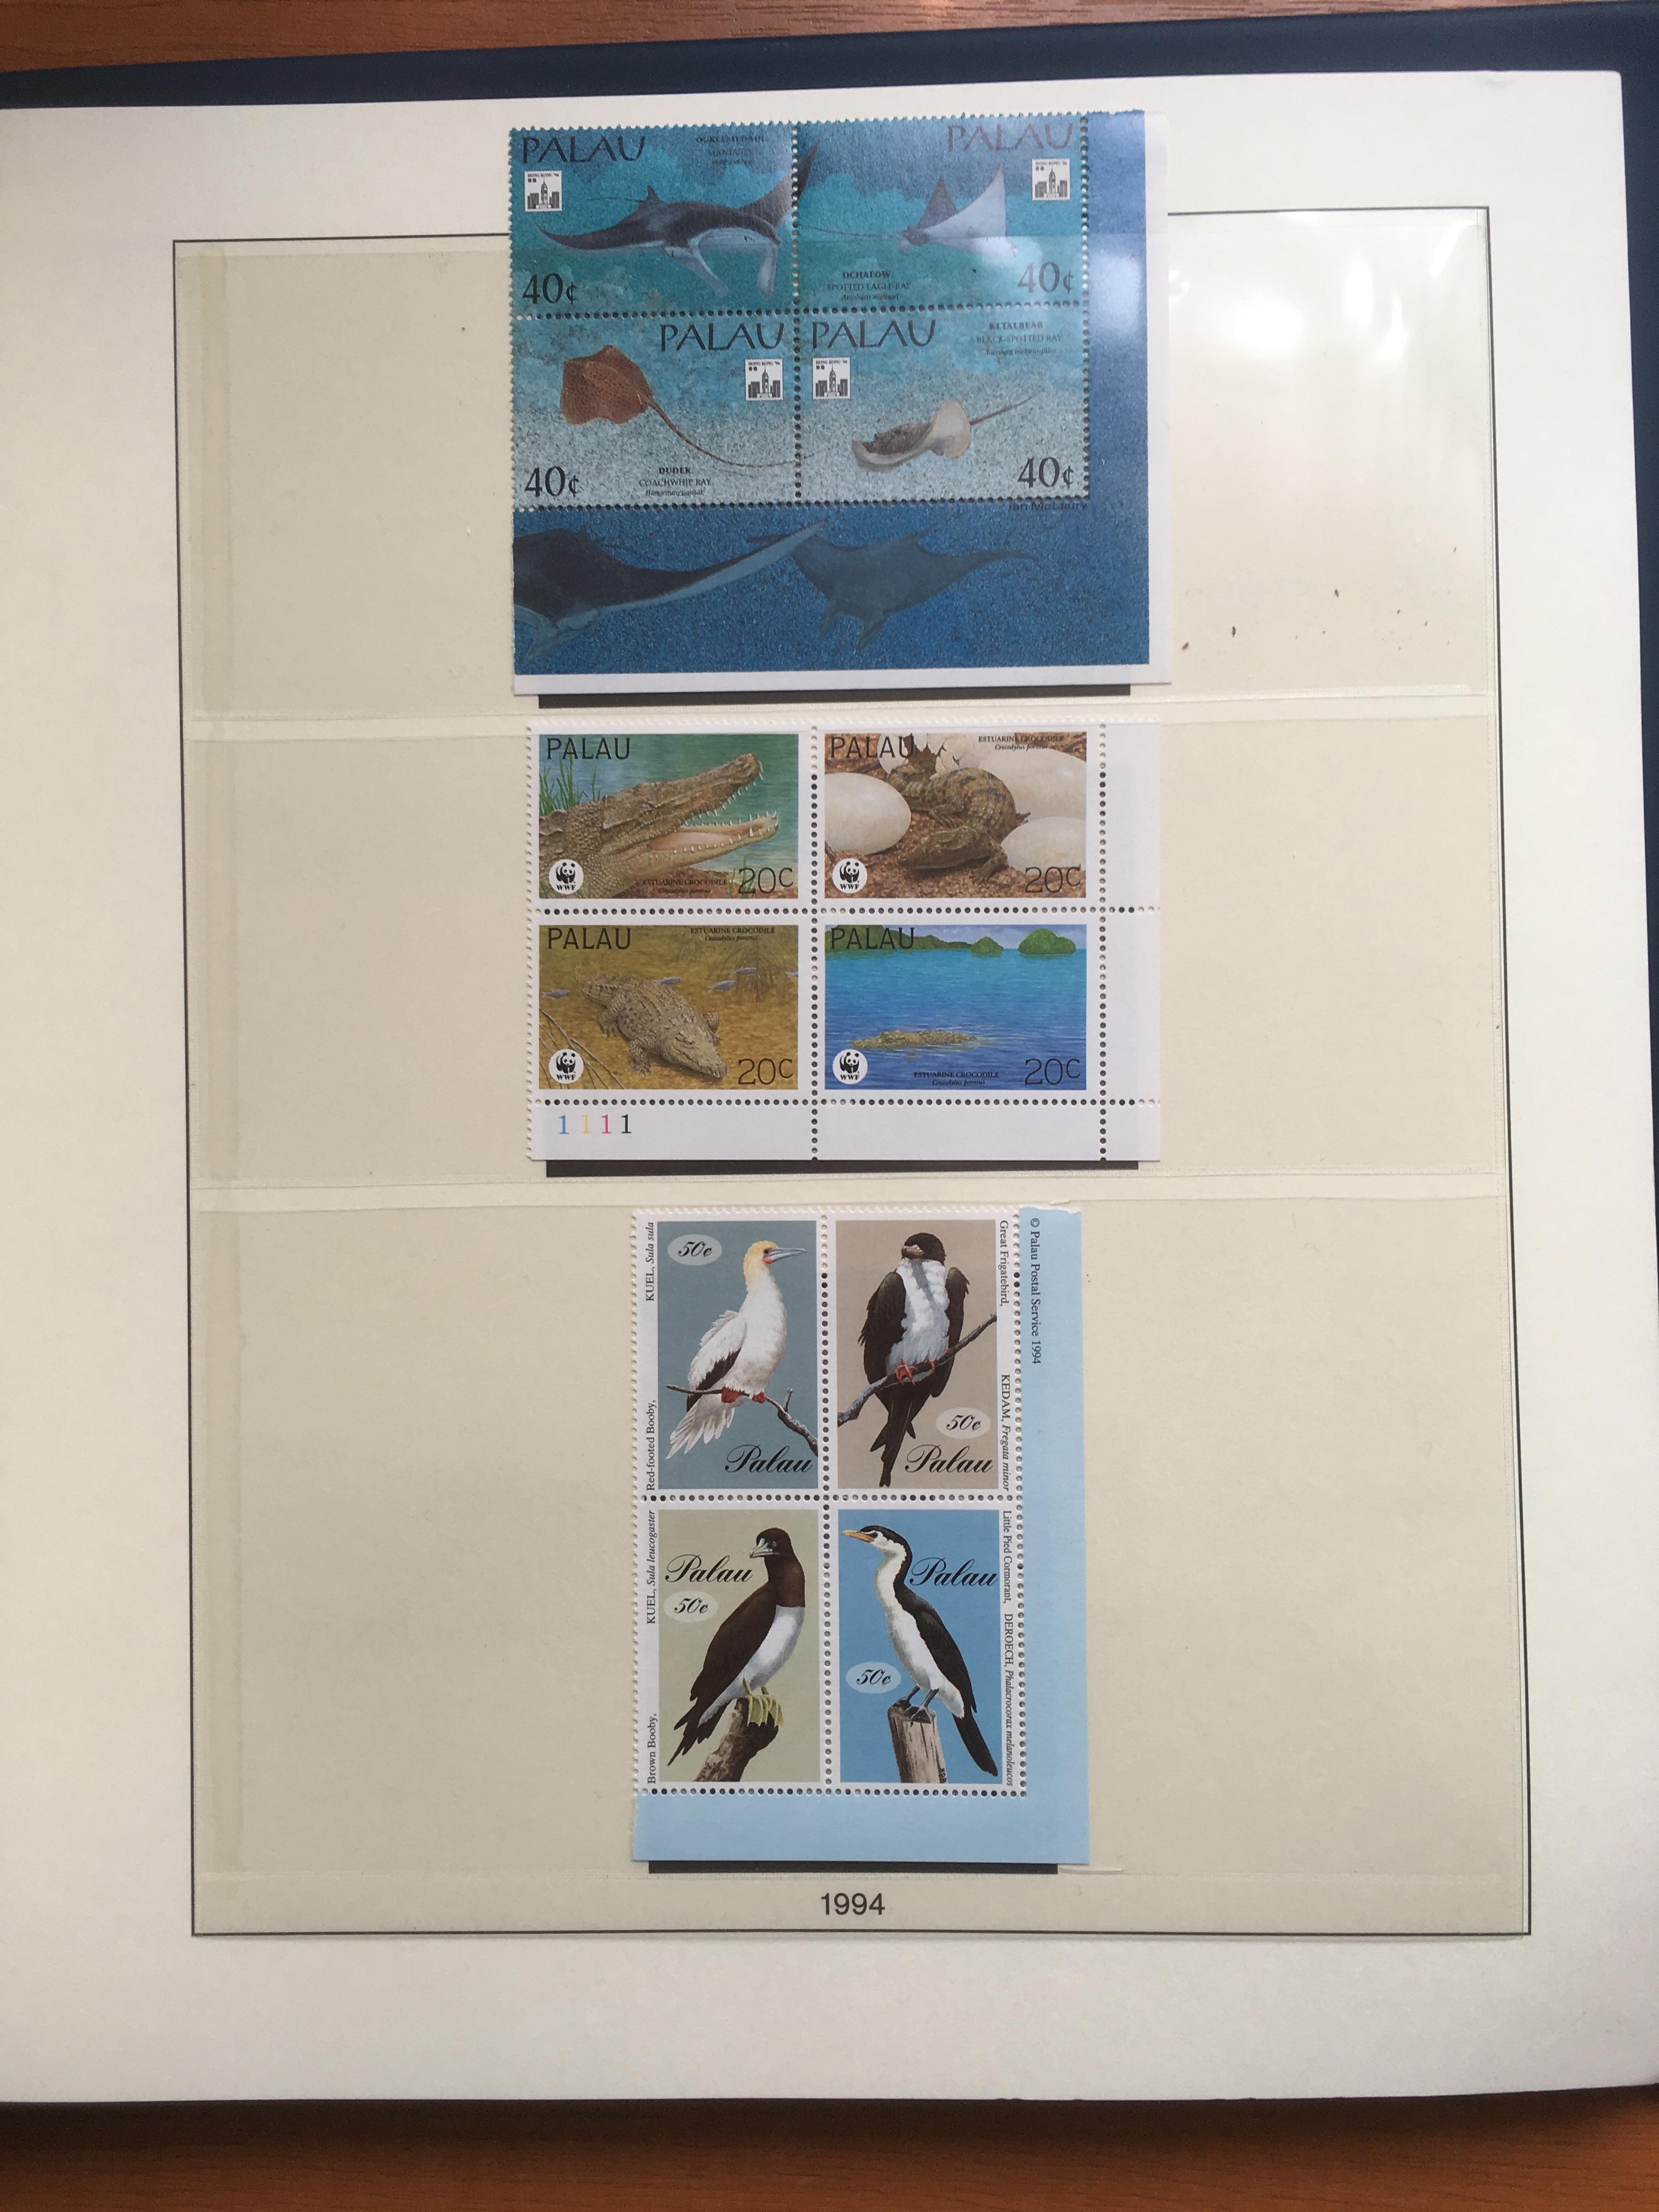 PALAU: 1983-2002 COMPREHENSIVE MNH COLLECTION IN TWO LINDER HINGELESS ALBUMS - Image 11 of 16